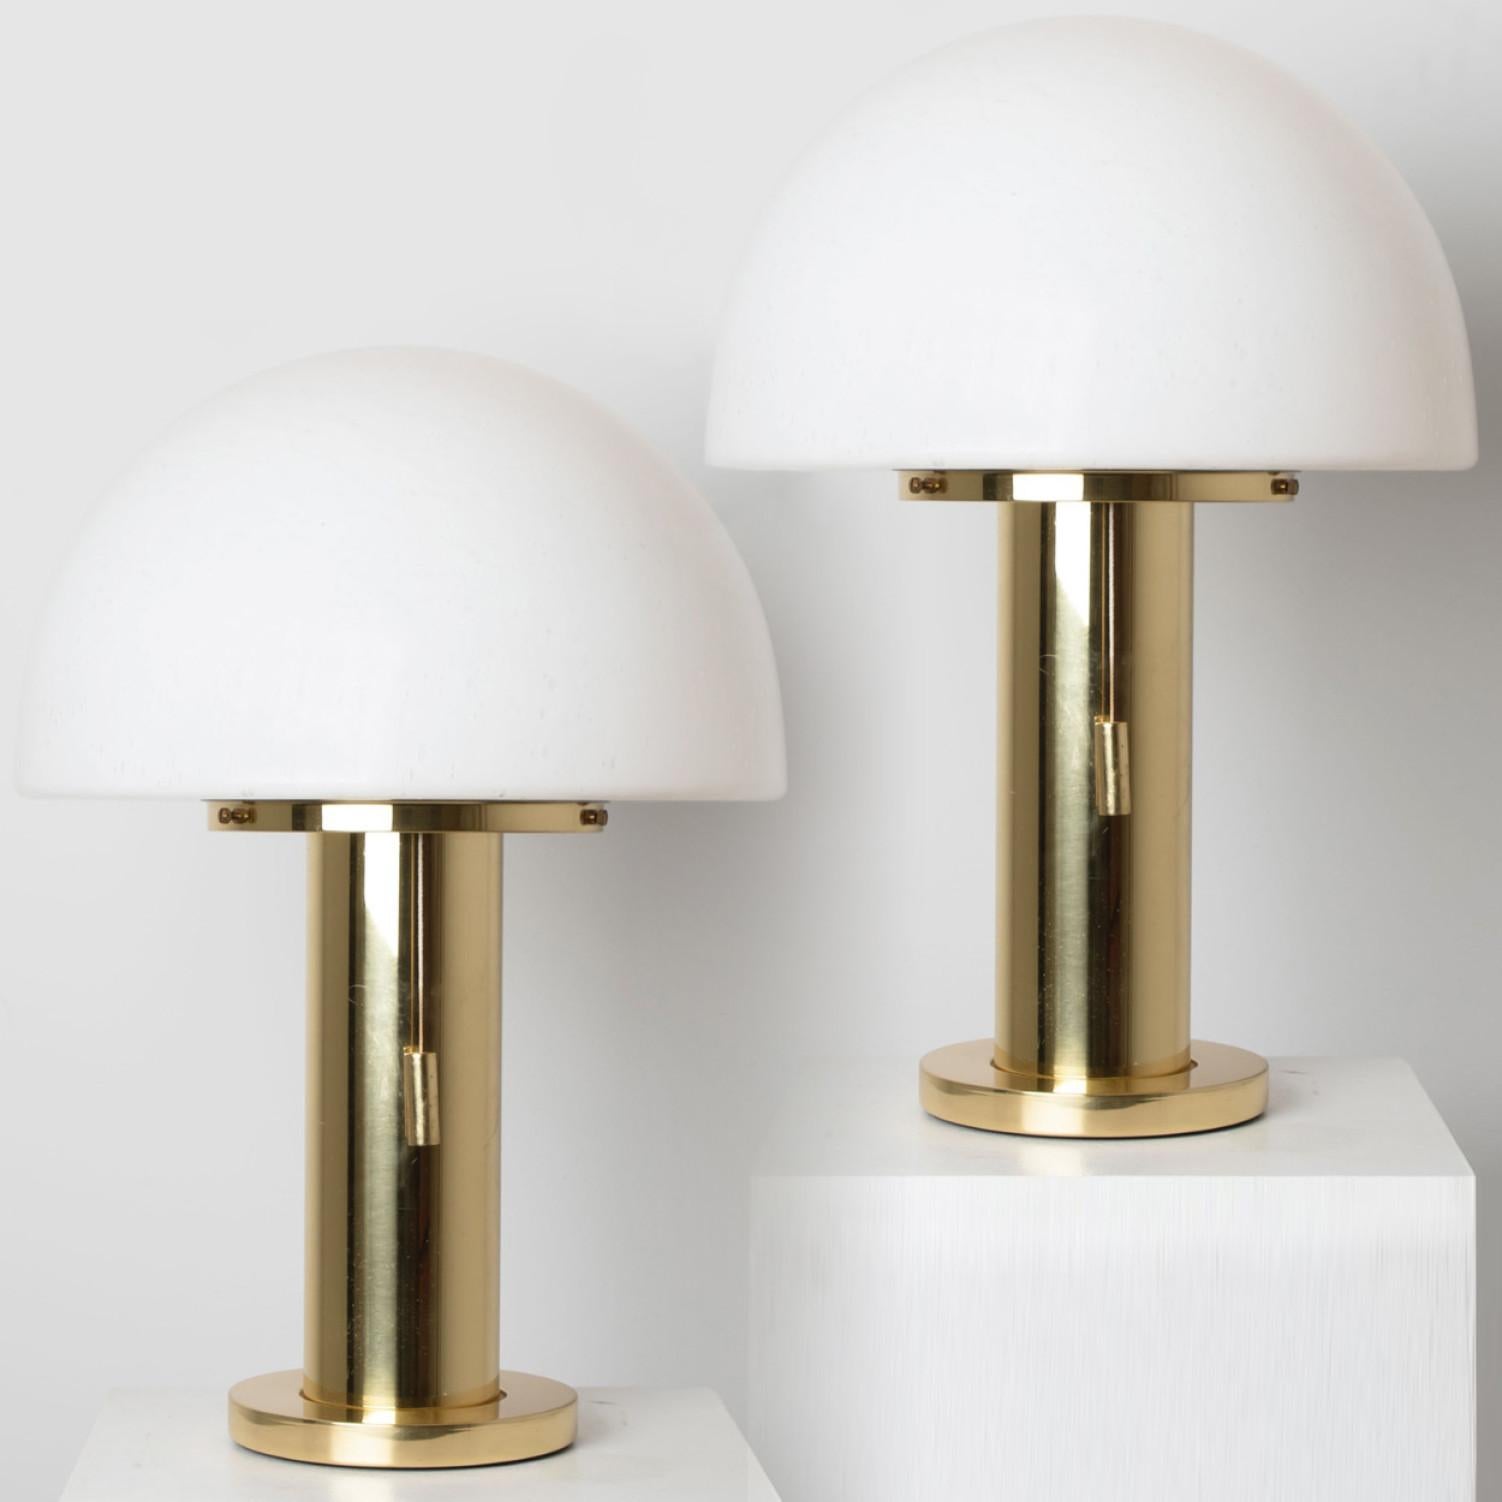 Mushroom table lamp with white satin glass and a brass base. Designed and manufactured by Limburg Glashütte, Germany in 1970.
The lamp has an organic shape of a mushroom. It is in perfect condition, great design from the